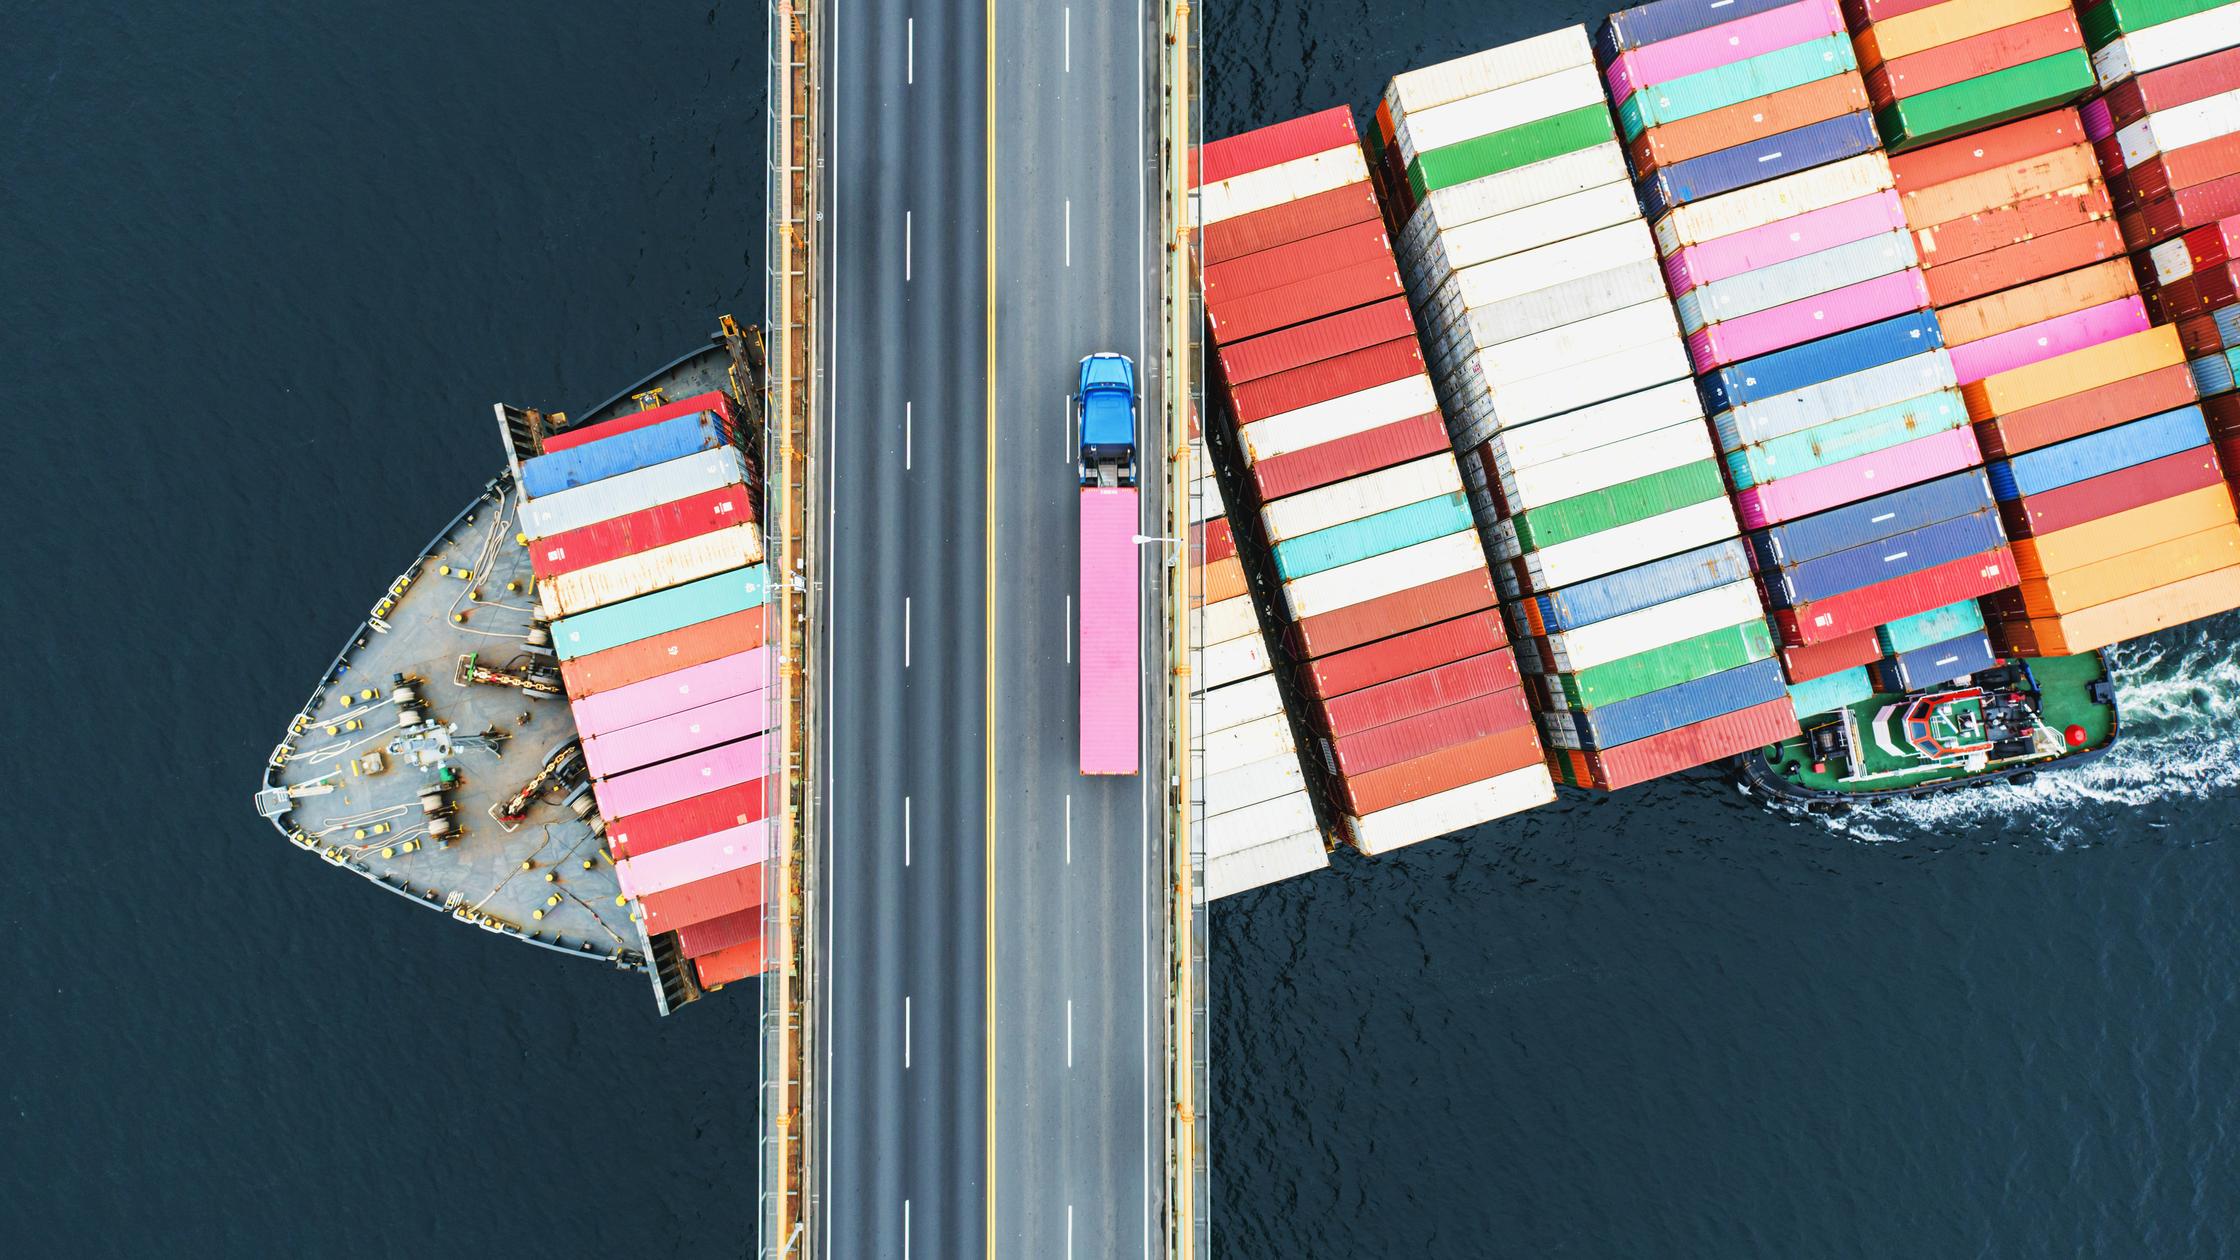 Aerial view of a container ship passing beneath a suspension bridge